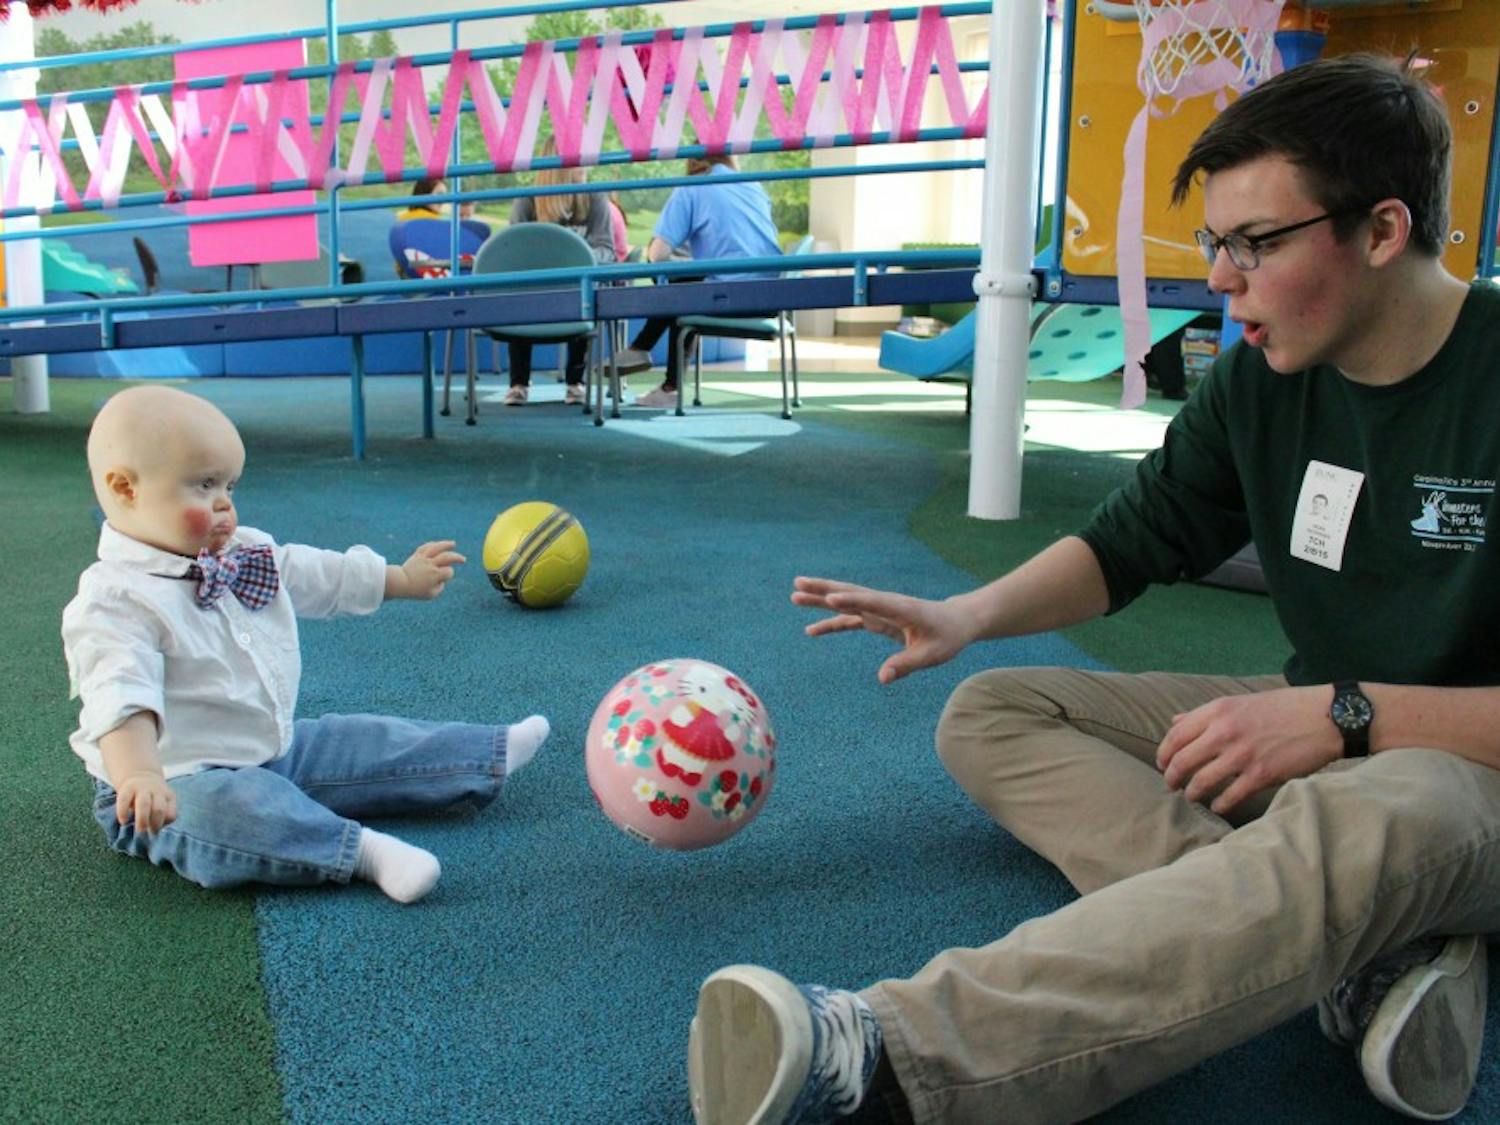 A Carolina for the Kids member plays with a child in UNC Hospitals. Photo courtesy Carolina for the Kids.